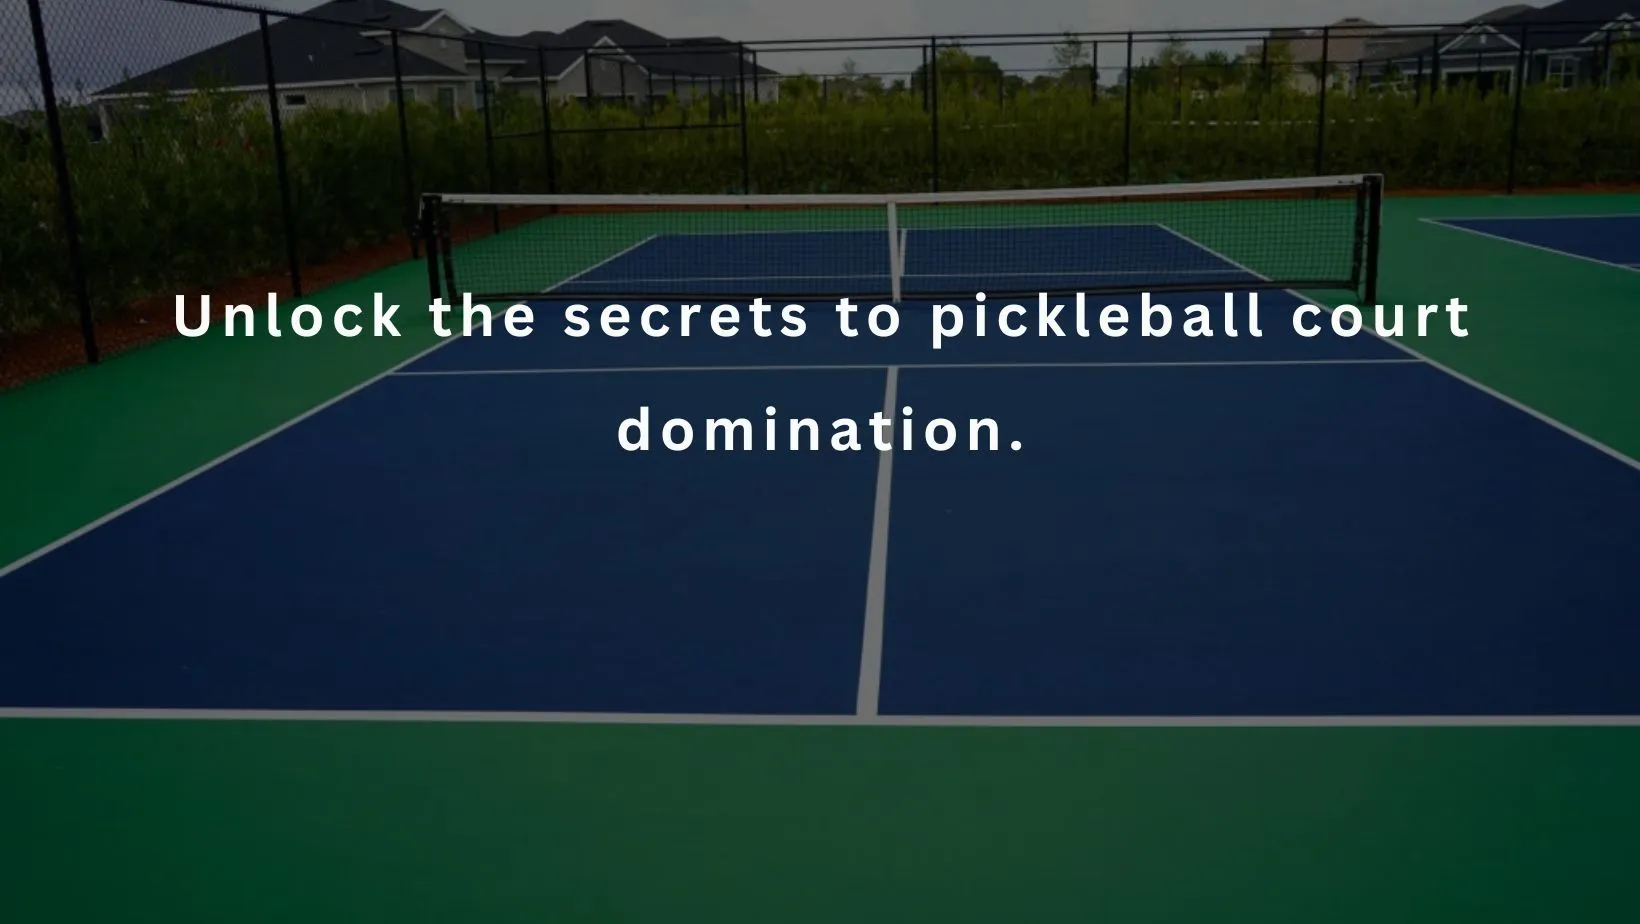 DIY pickleball court, learn to build your own pickleball court